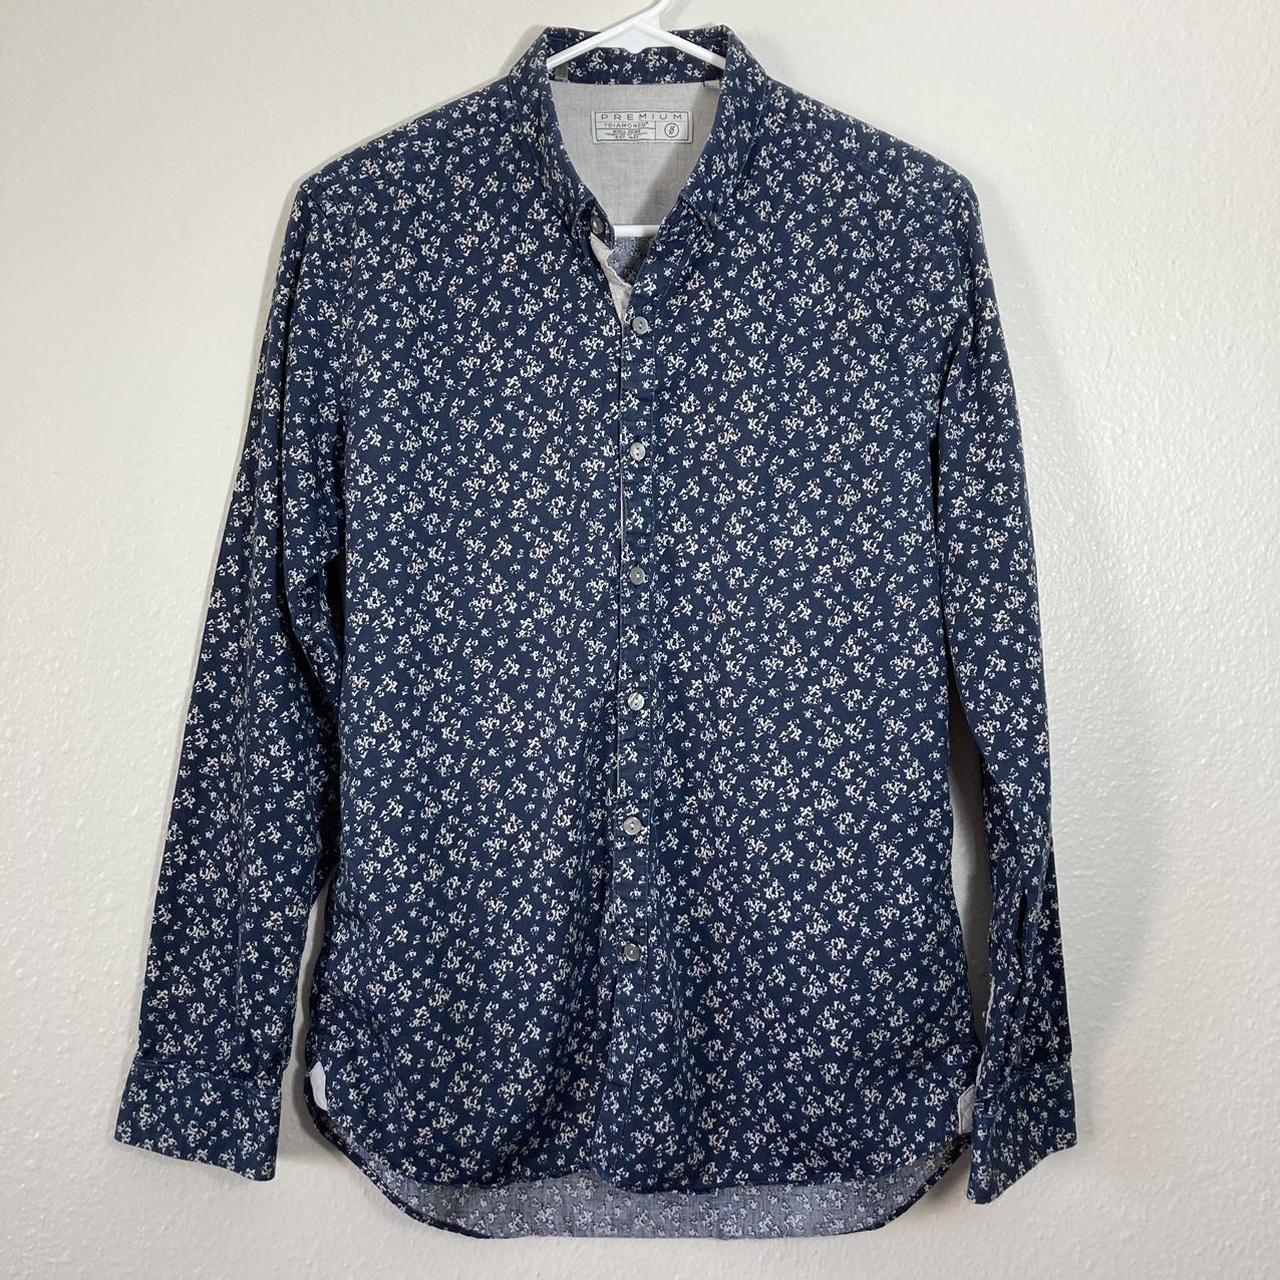 Men's Long Sleeve Woven Button Up Shirt In A Calico Navy Floral